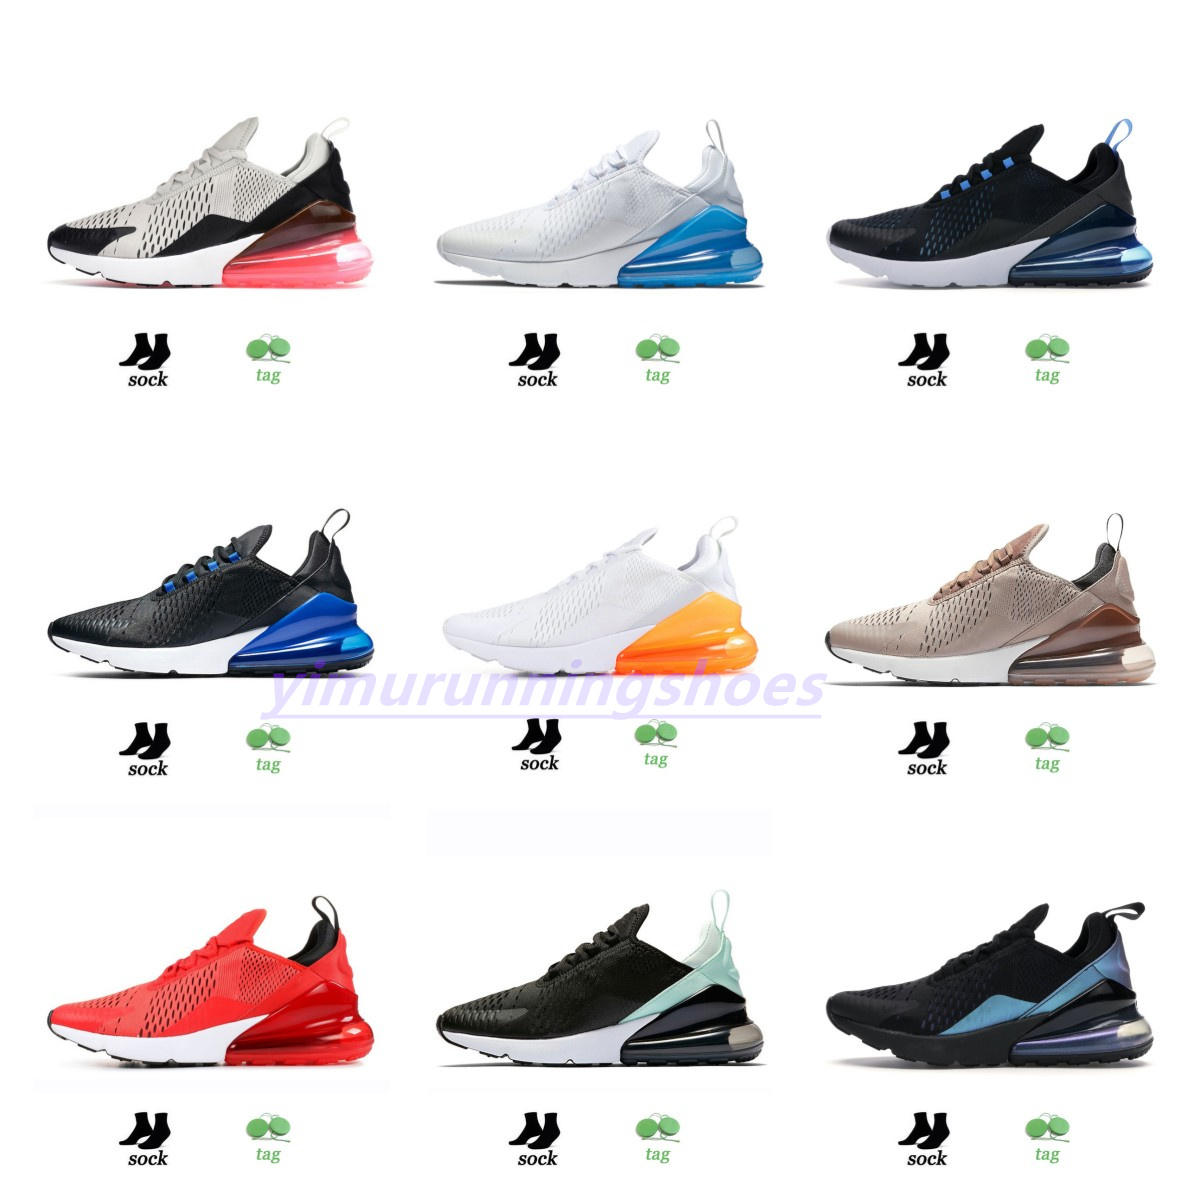 

2022 Designer Sports Running Shoes Triple Black ALL White Women Men Top Quality Summer Gradient Blue Punch 27s Trainers Sneakers Y6, Color 29 40-45